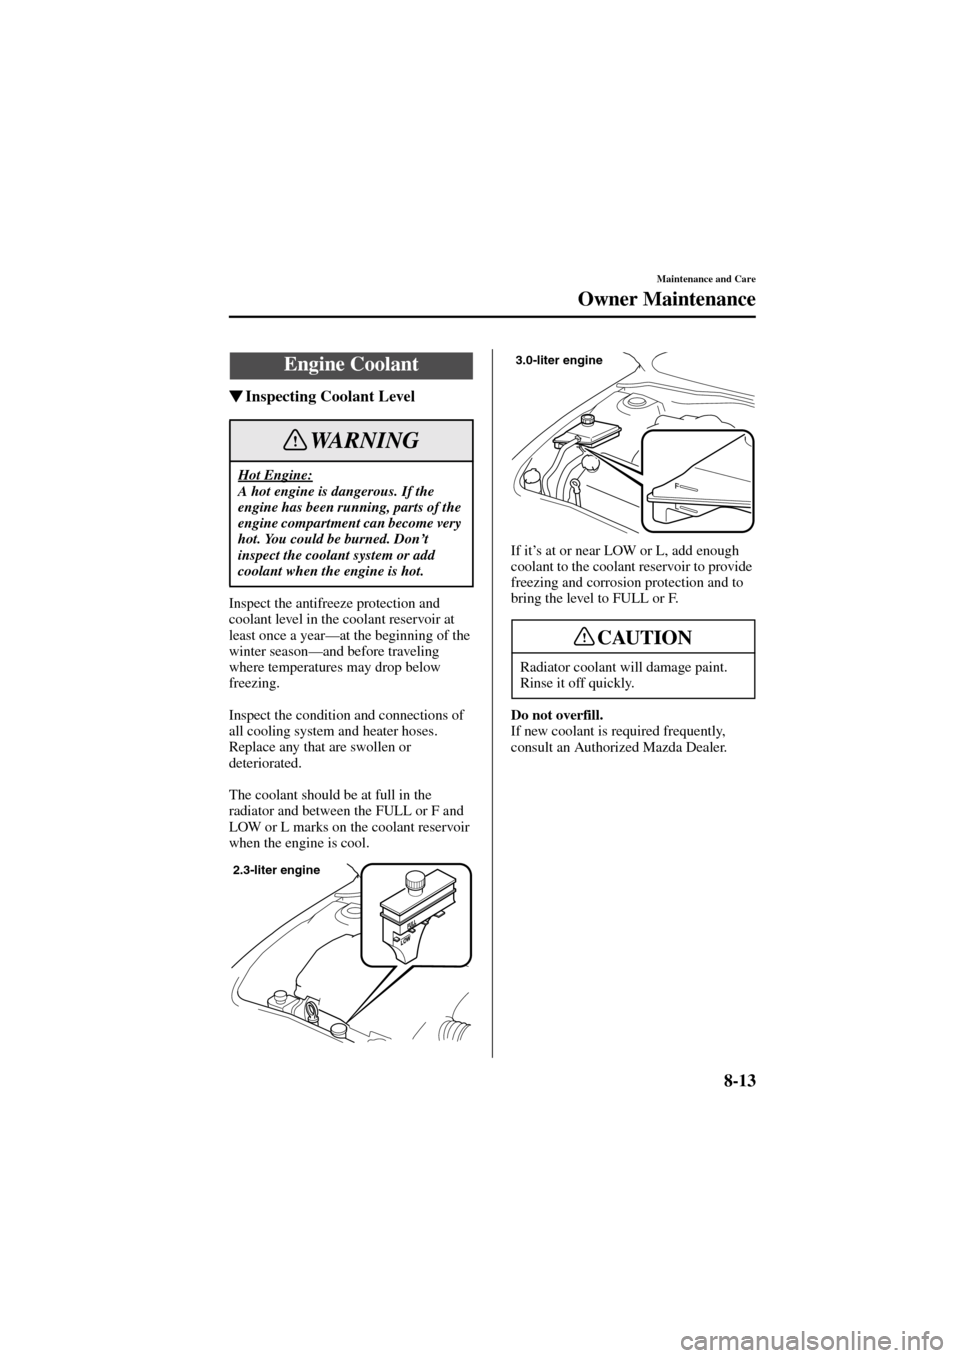 MAZDA MODEL 6 2004   (in English) Owners Manual 8-13
Maintenance and Care
Owner Maintenance
Form No. 8R29-EA-02I
Inspecting Coolant Level
Inspect the antifreeze protection and 
coolant level in the coolant reservoir at 
least once a year—at the 